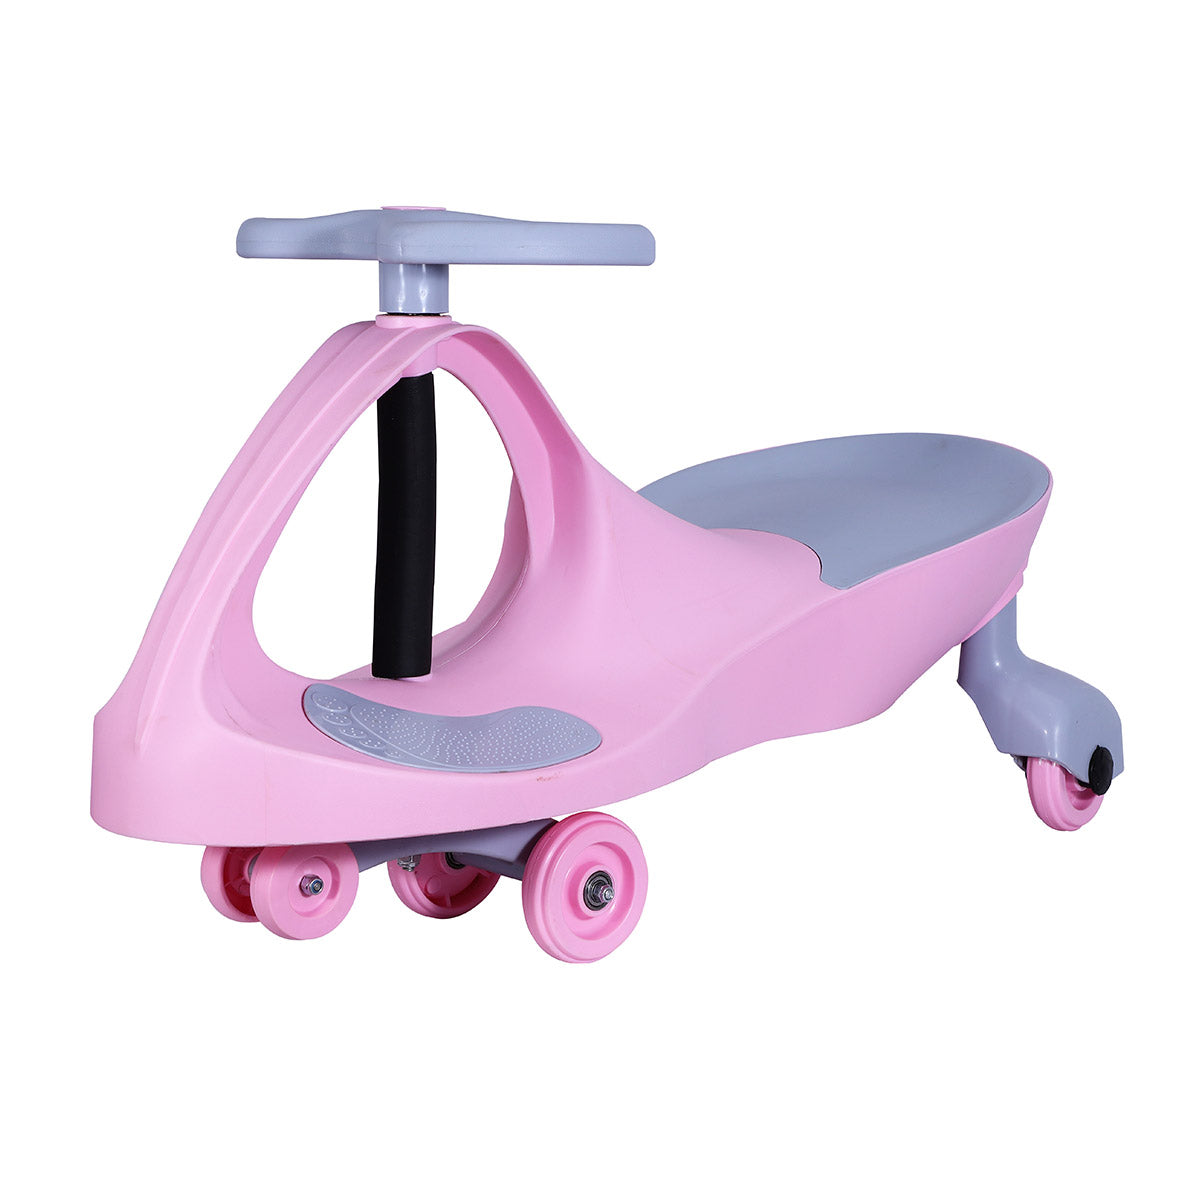 Buy Toys for Baby & Kids Online in India - Toy Zone